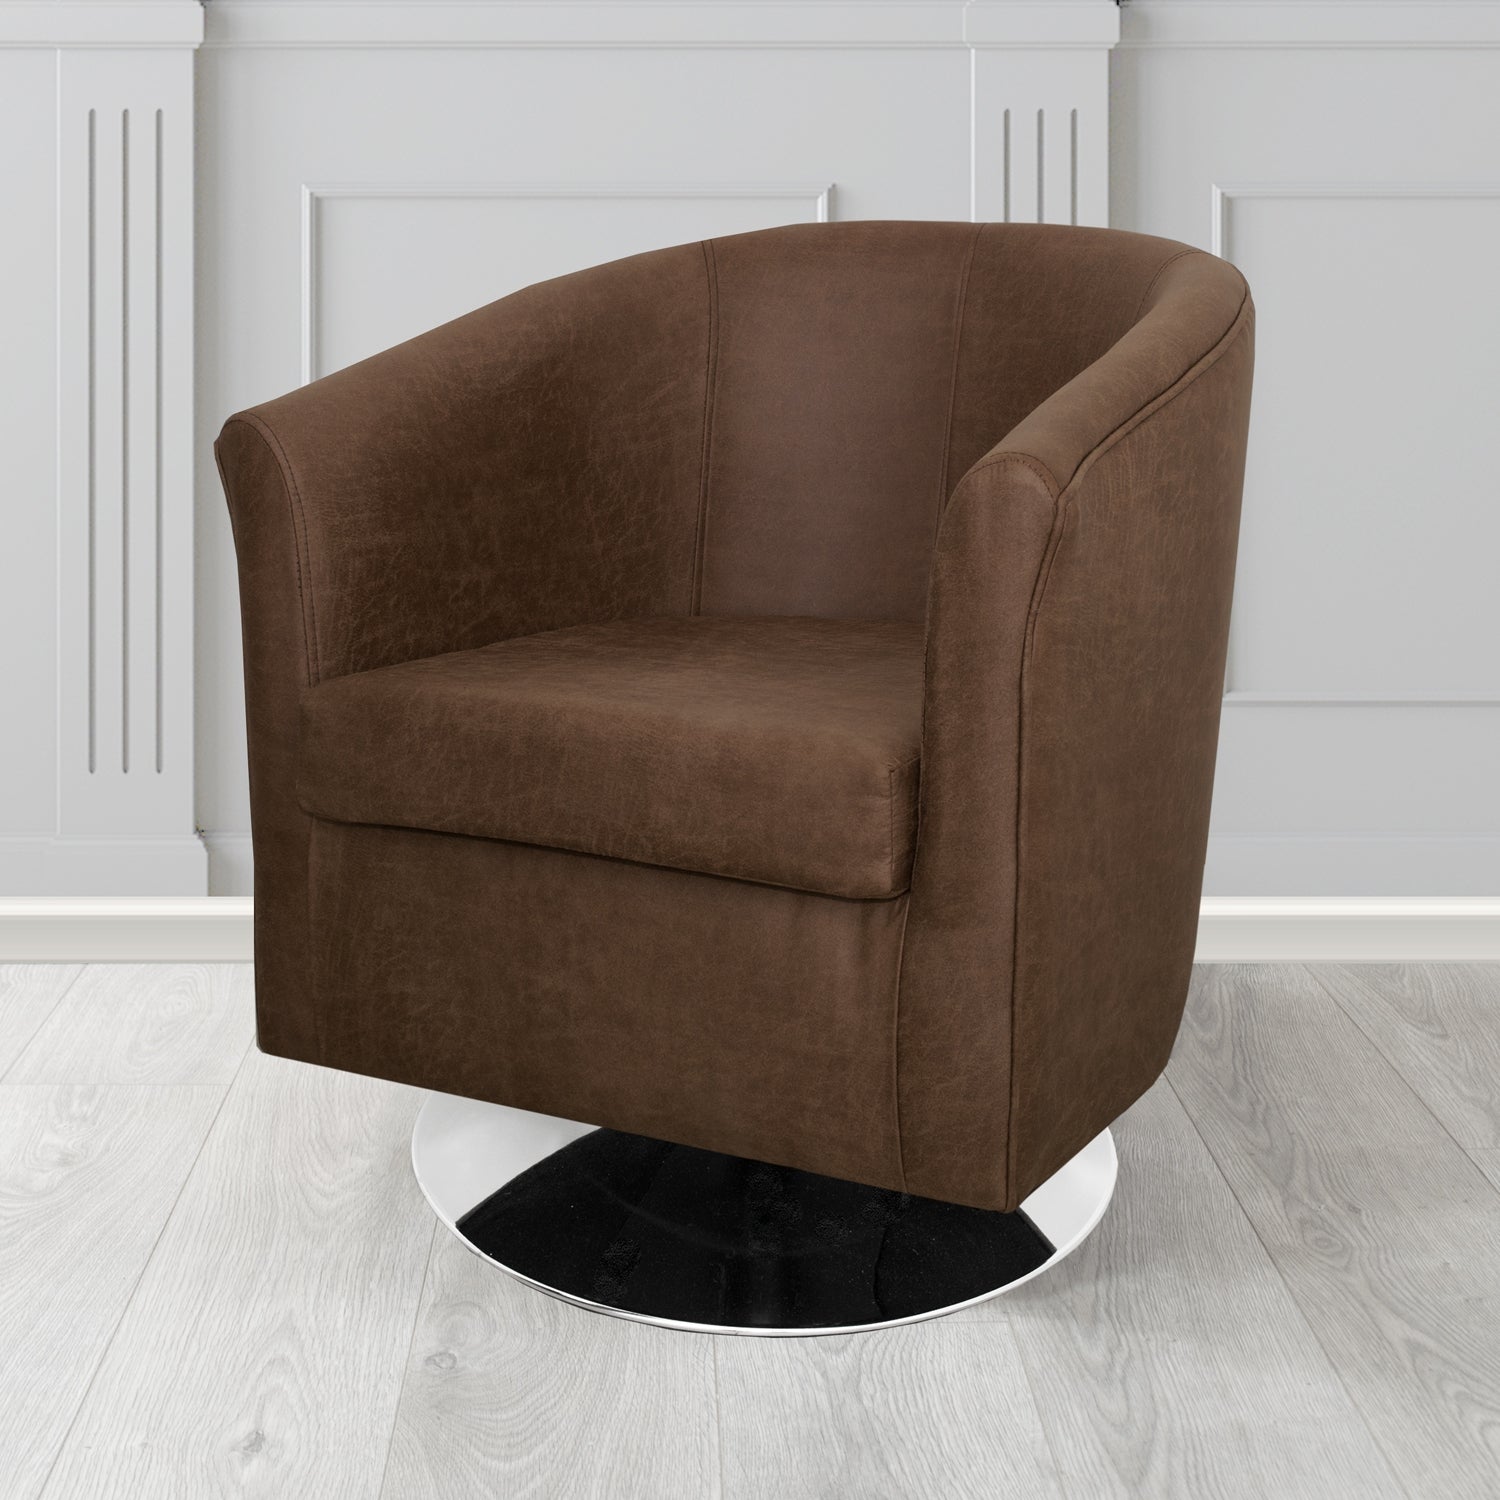 Tuscany Swivel Tub Chair in Nevada Chocolate Faux Leather - The Tub Chair Shop